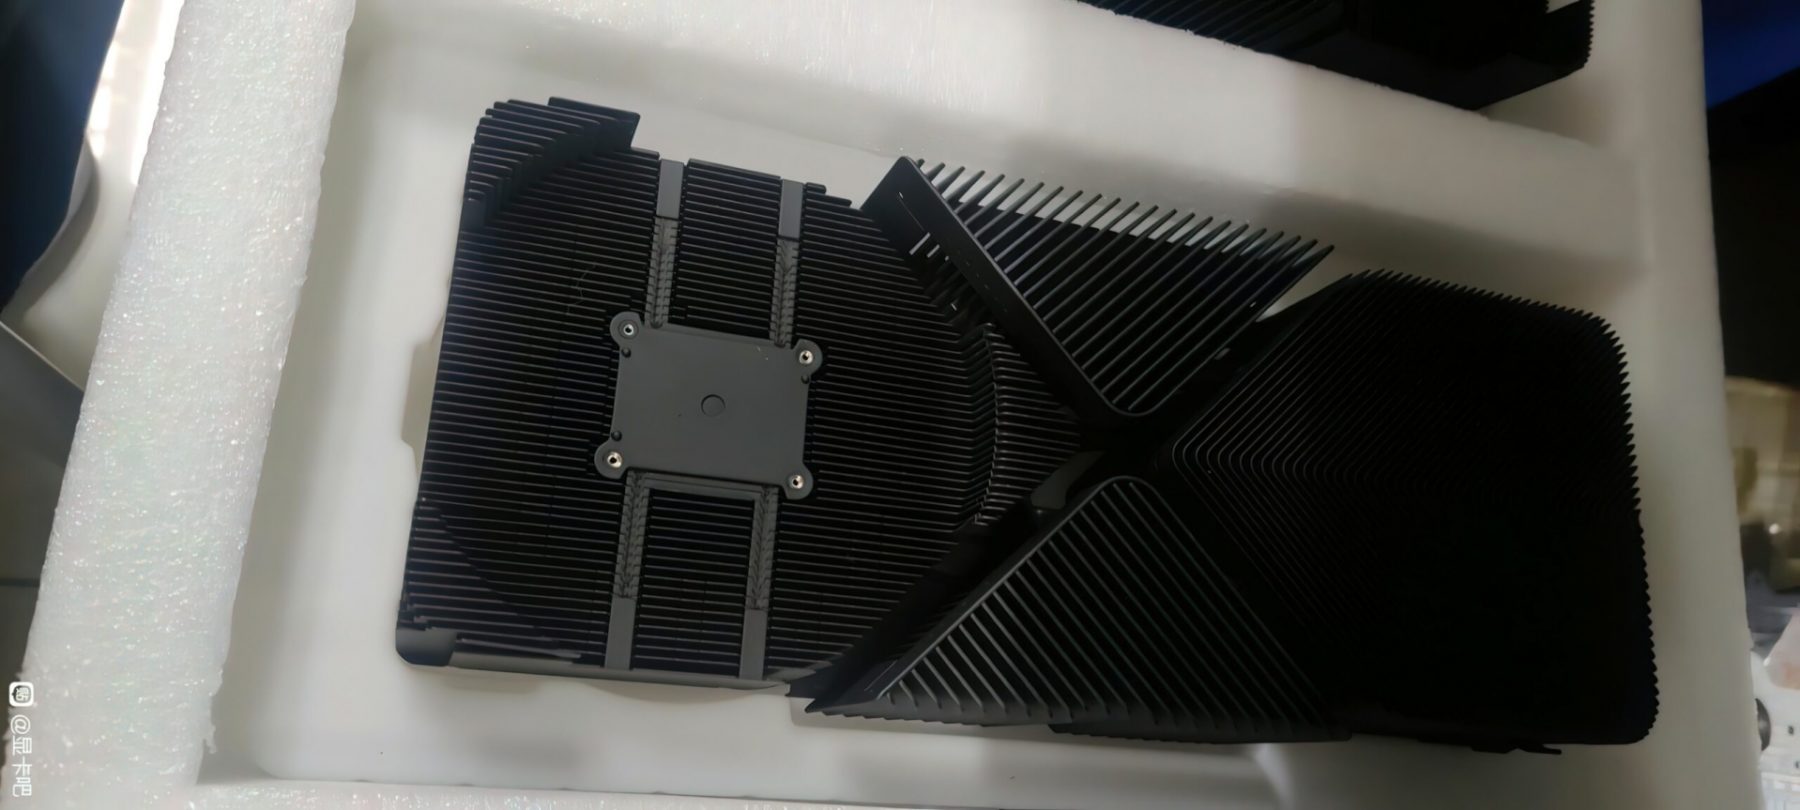 NVIDIA RTX 40-Series Founder Edition Cooler Photos Surface Online - returnal